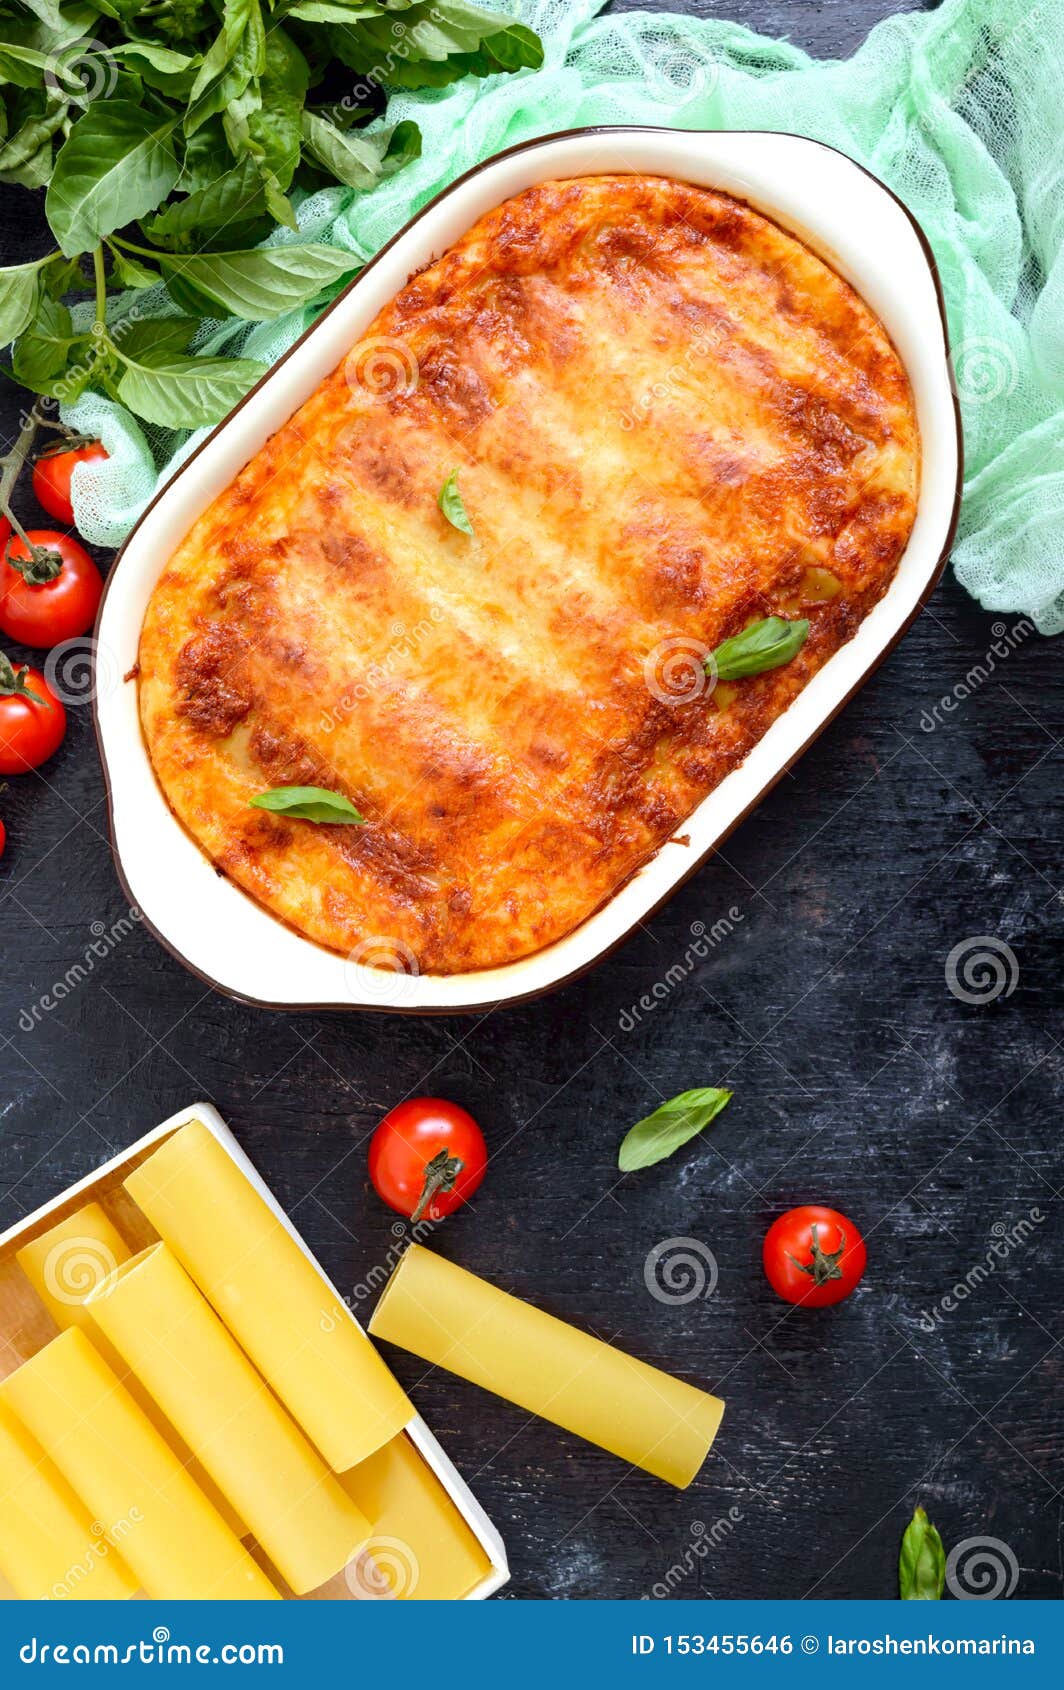 Stuffed Cannelloni with Bechamel Sauce. Cannelloni Pasta Baked with ...